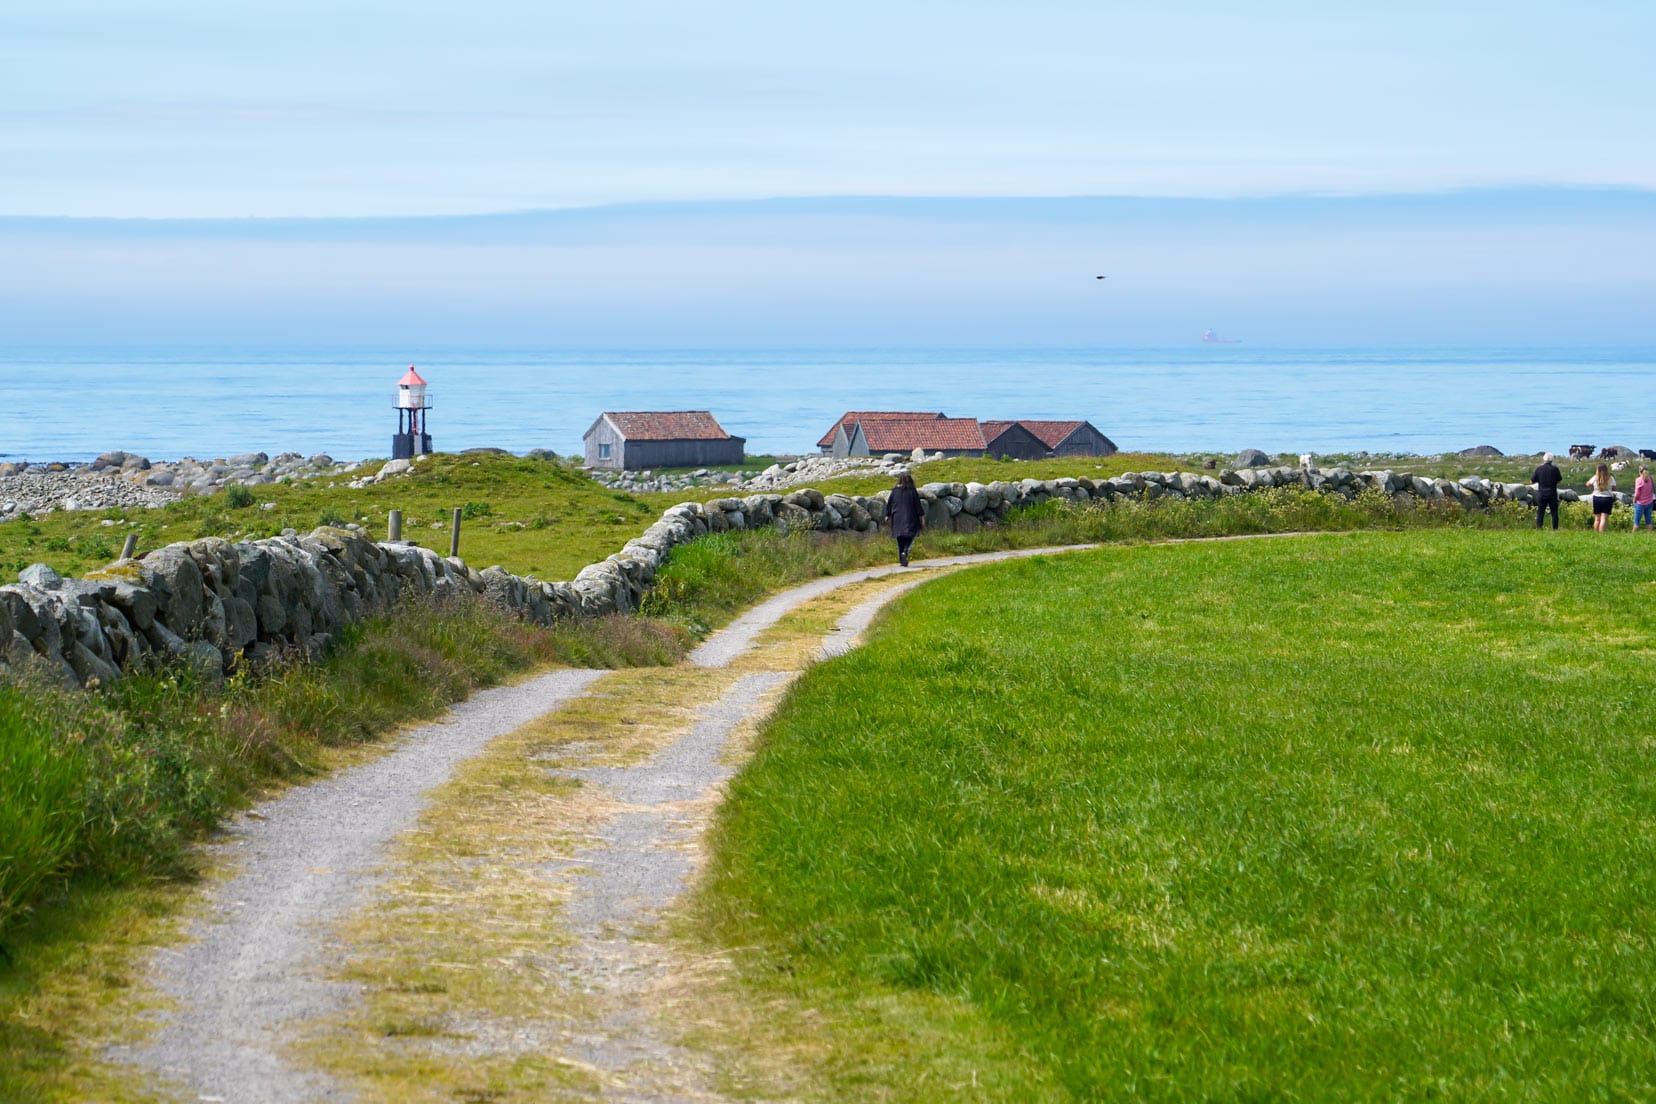 A pathway by a field and stone wall wiht the ocean in the background